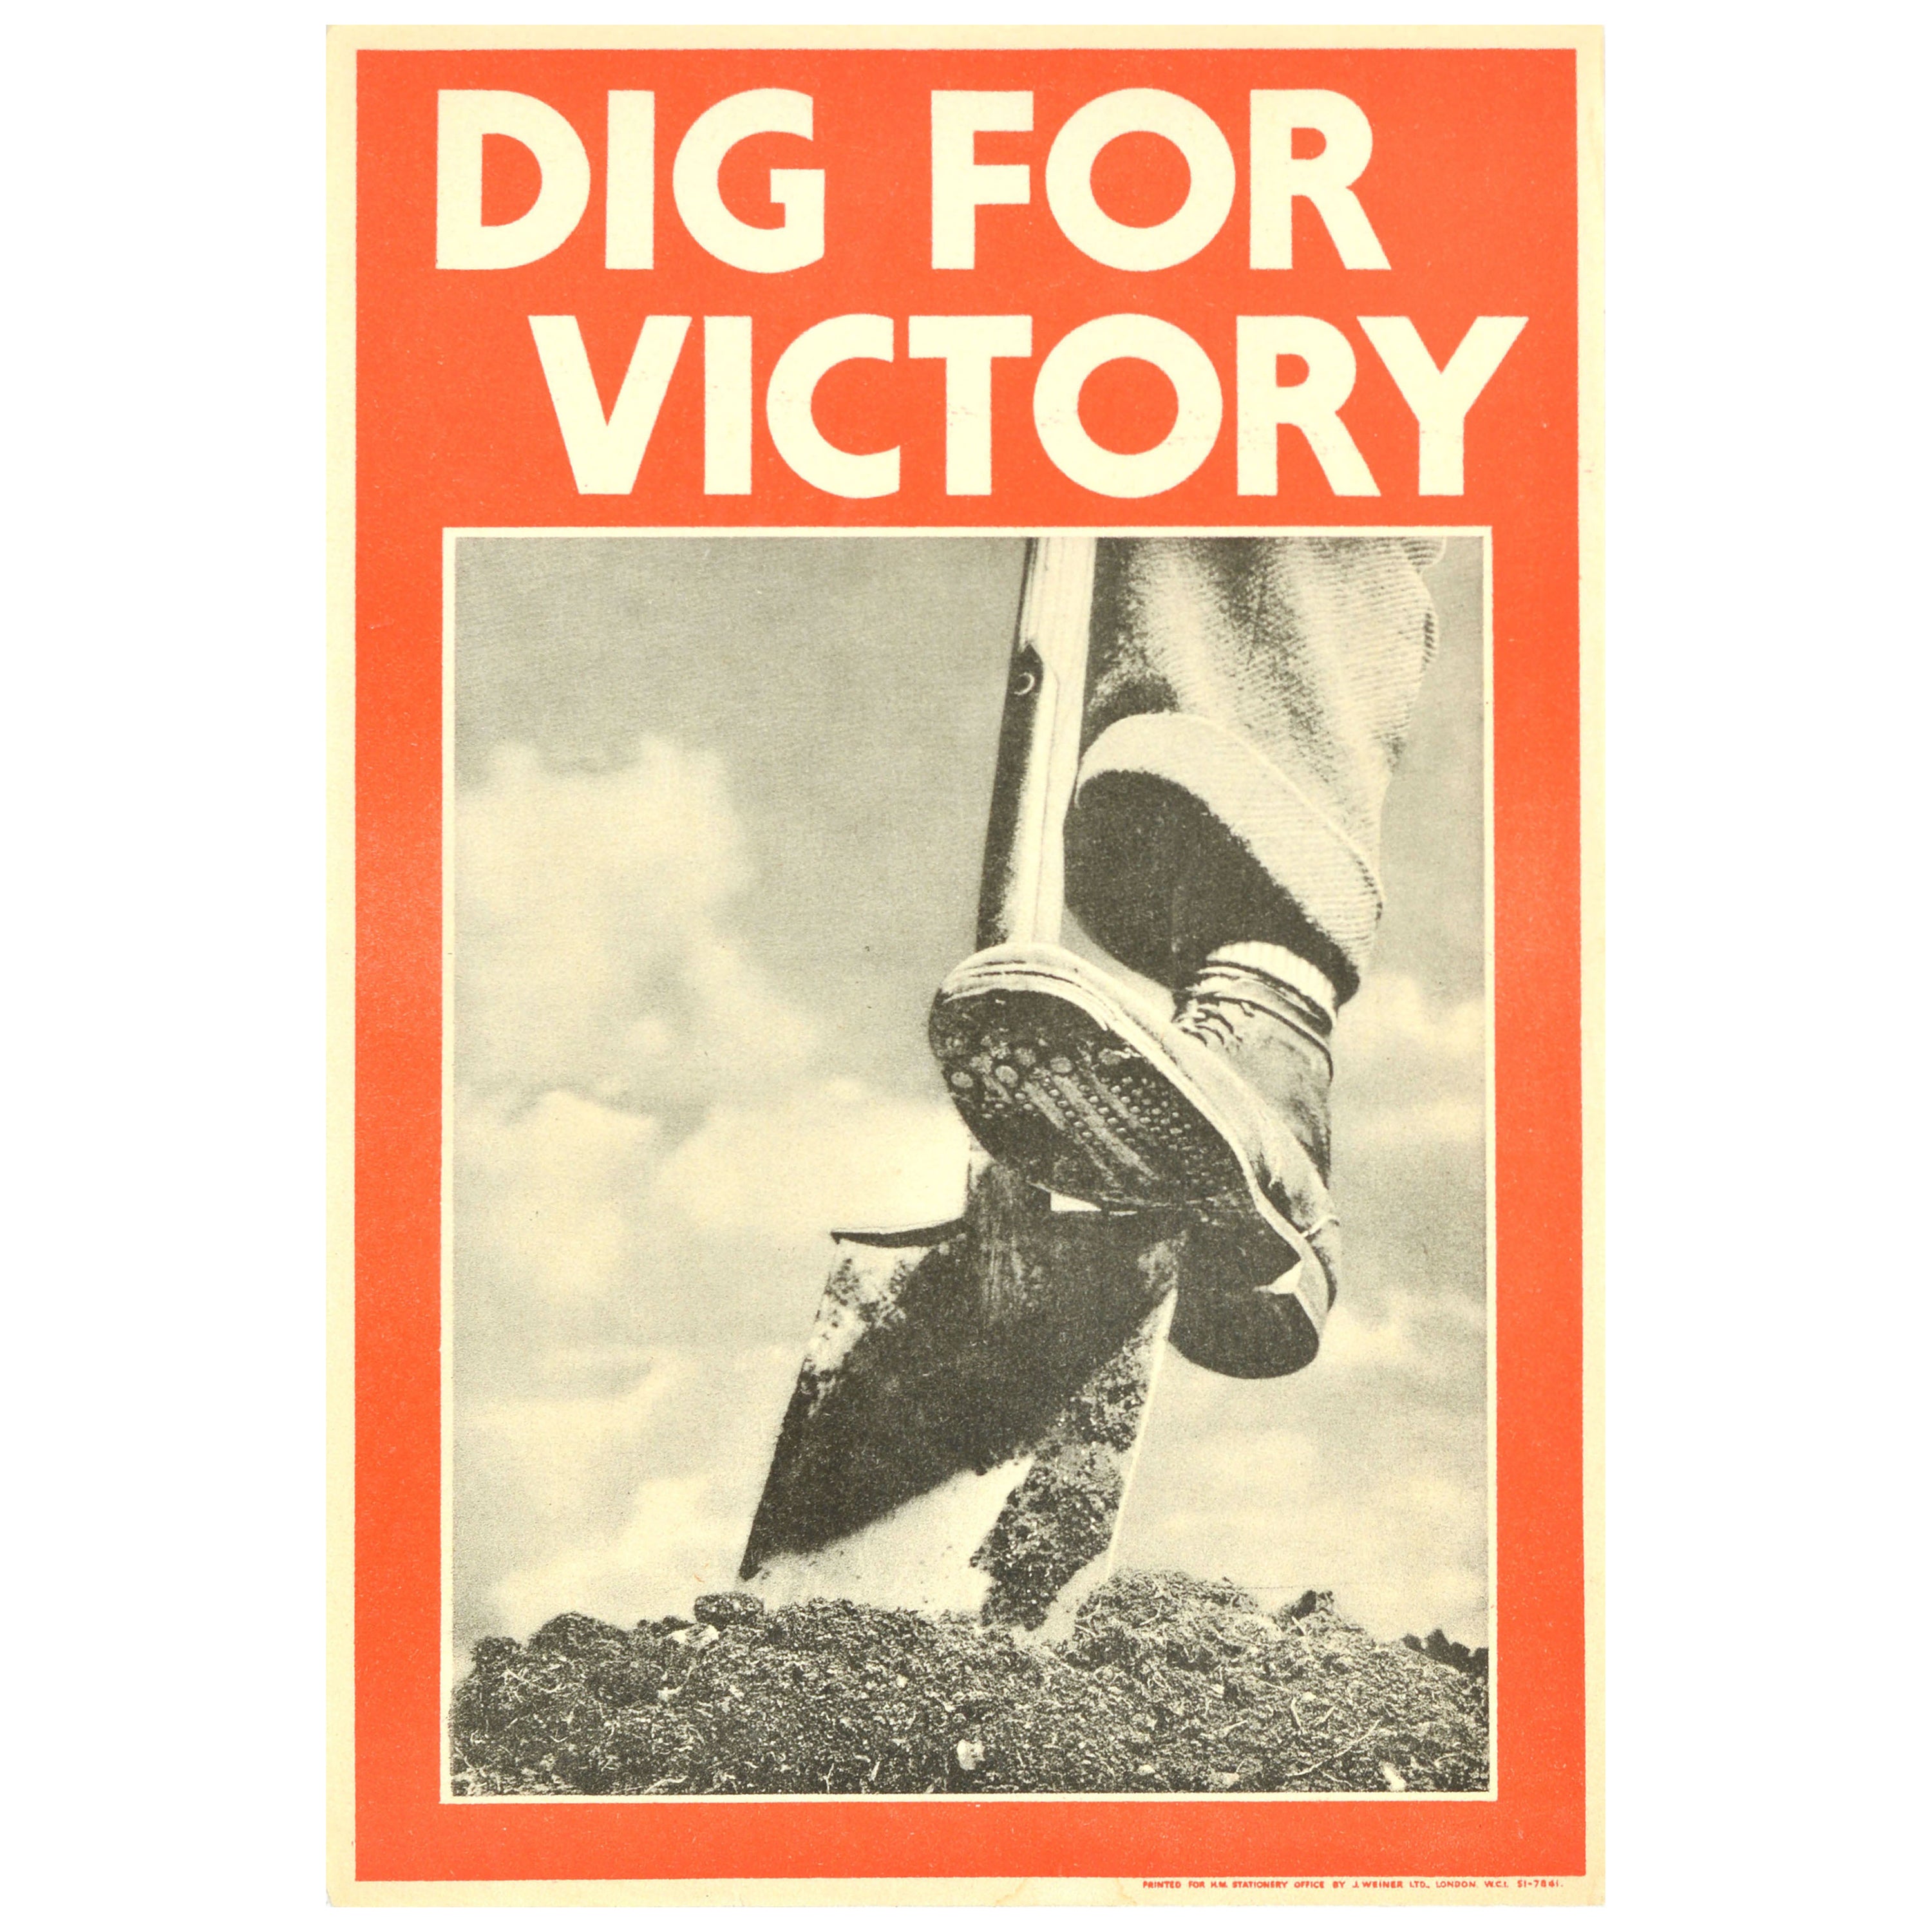 Original Vintage World War Two Propaganda Poster Dig For Victory WWII Home Front